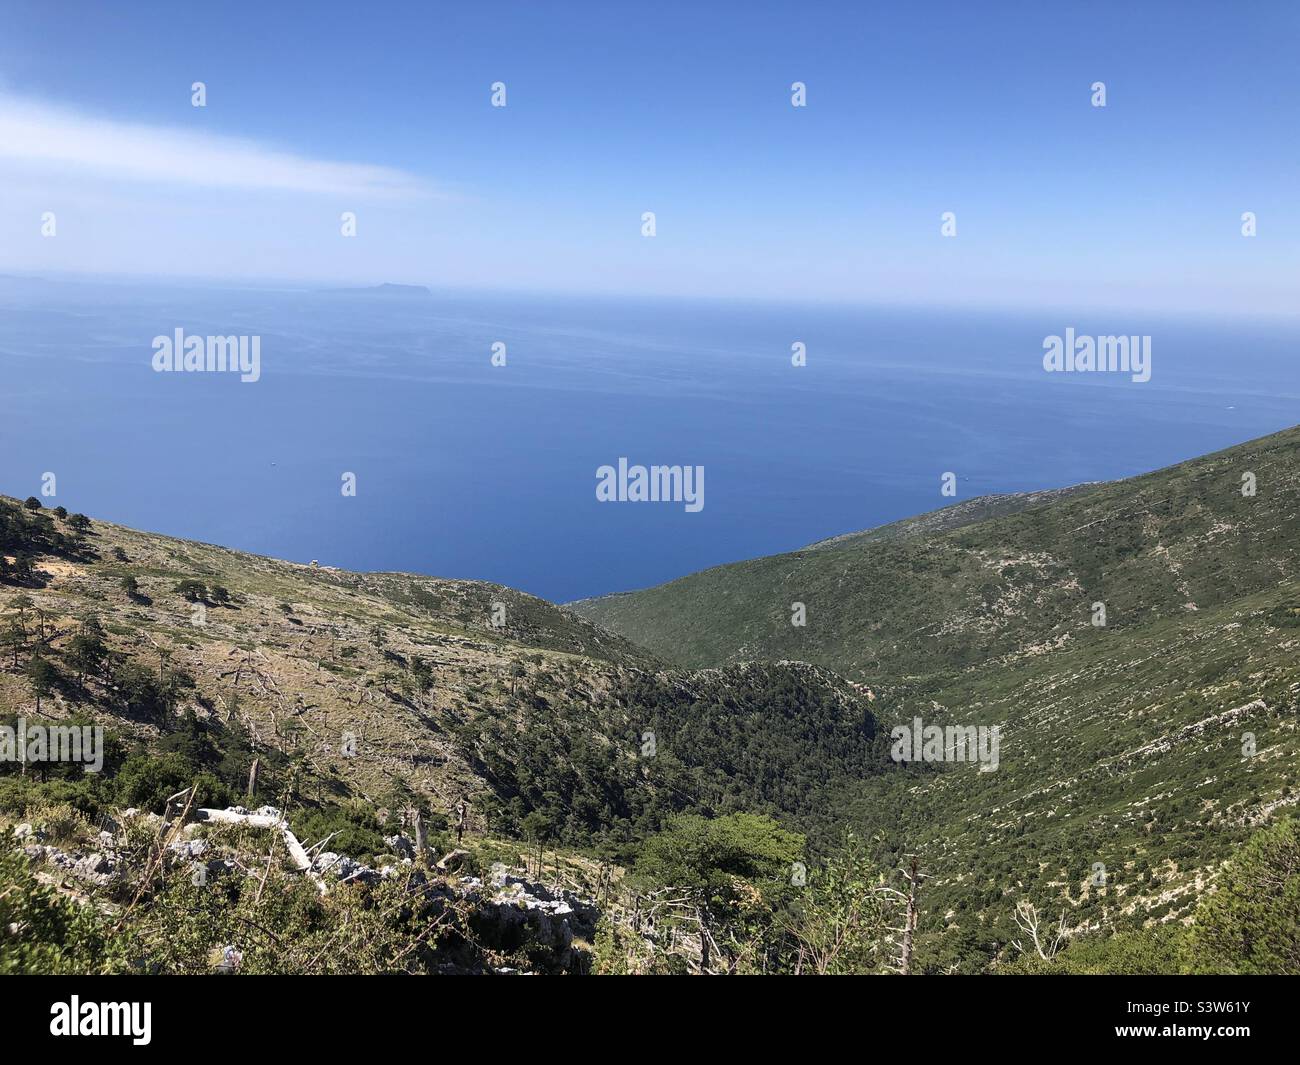 The epic landscapes of Albania Stock Photo